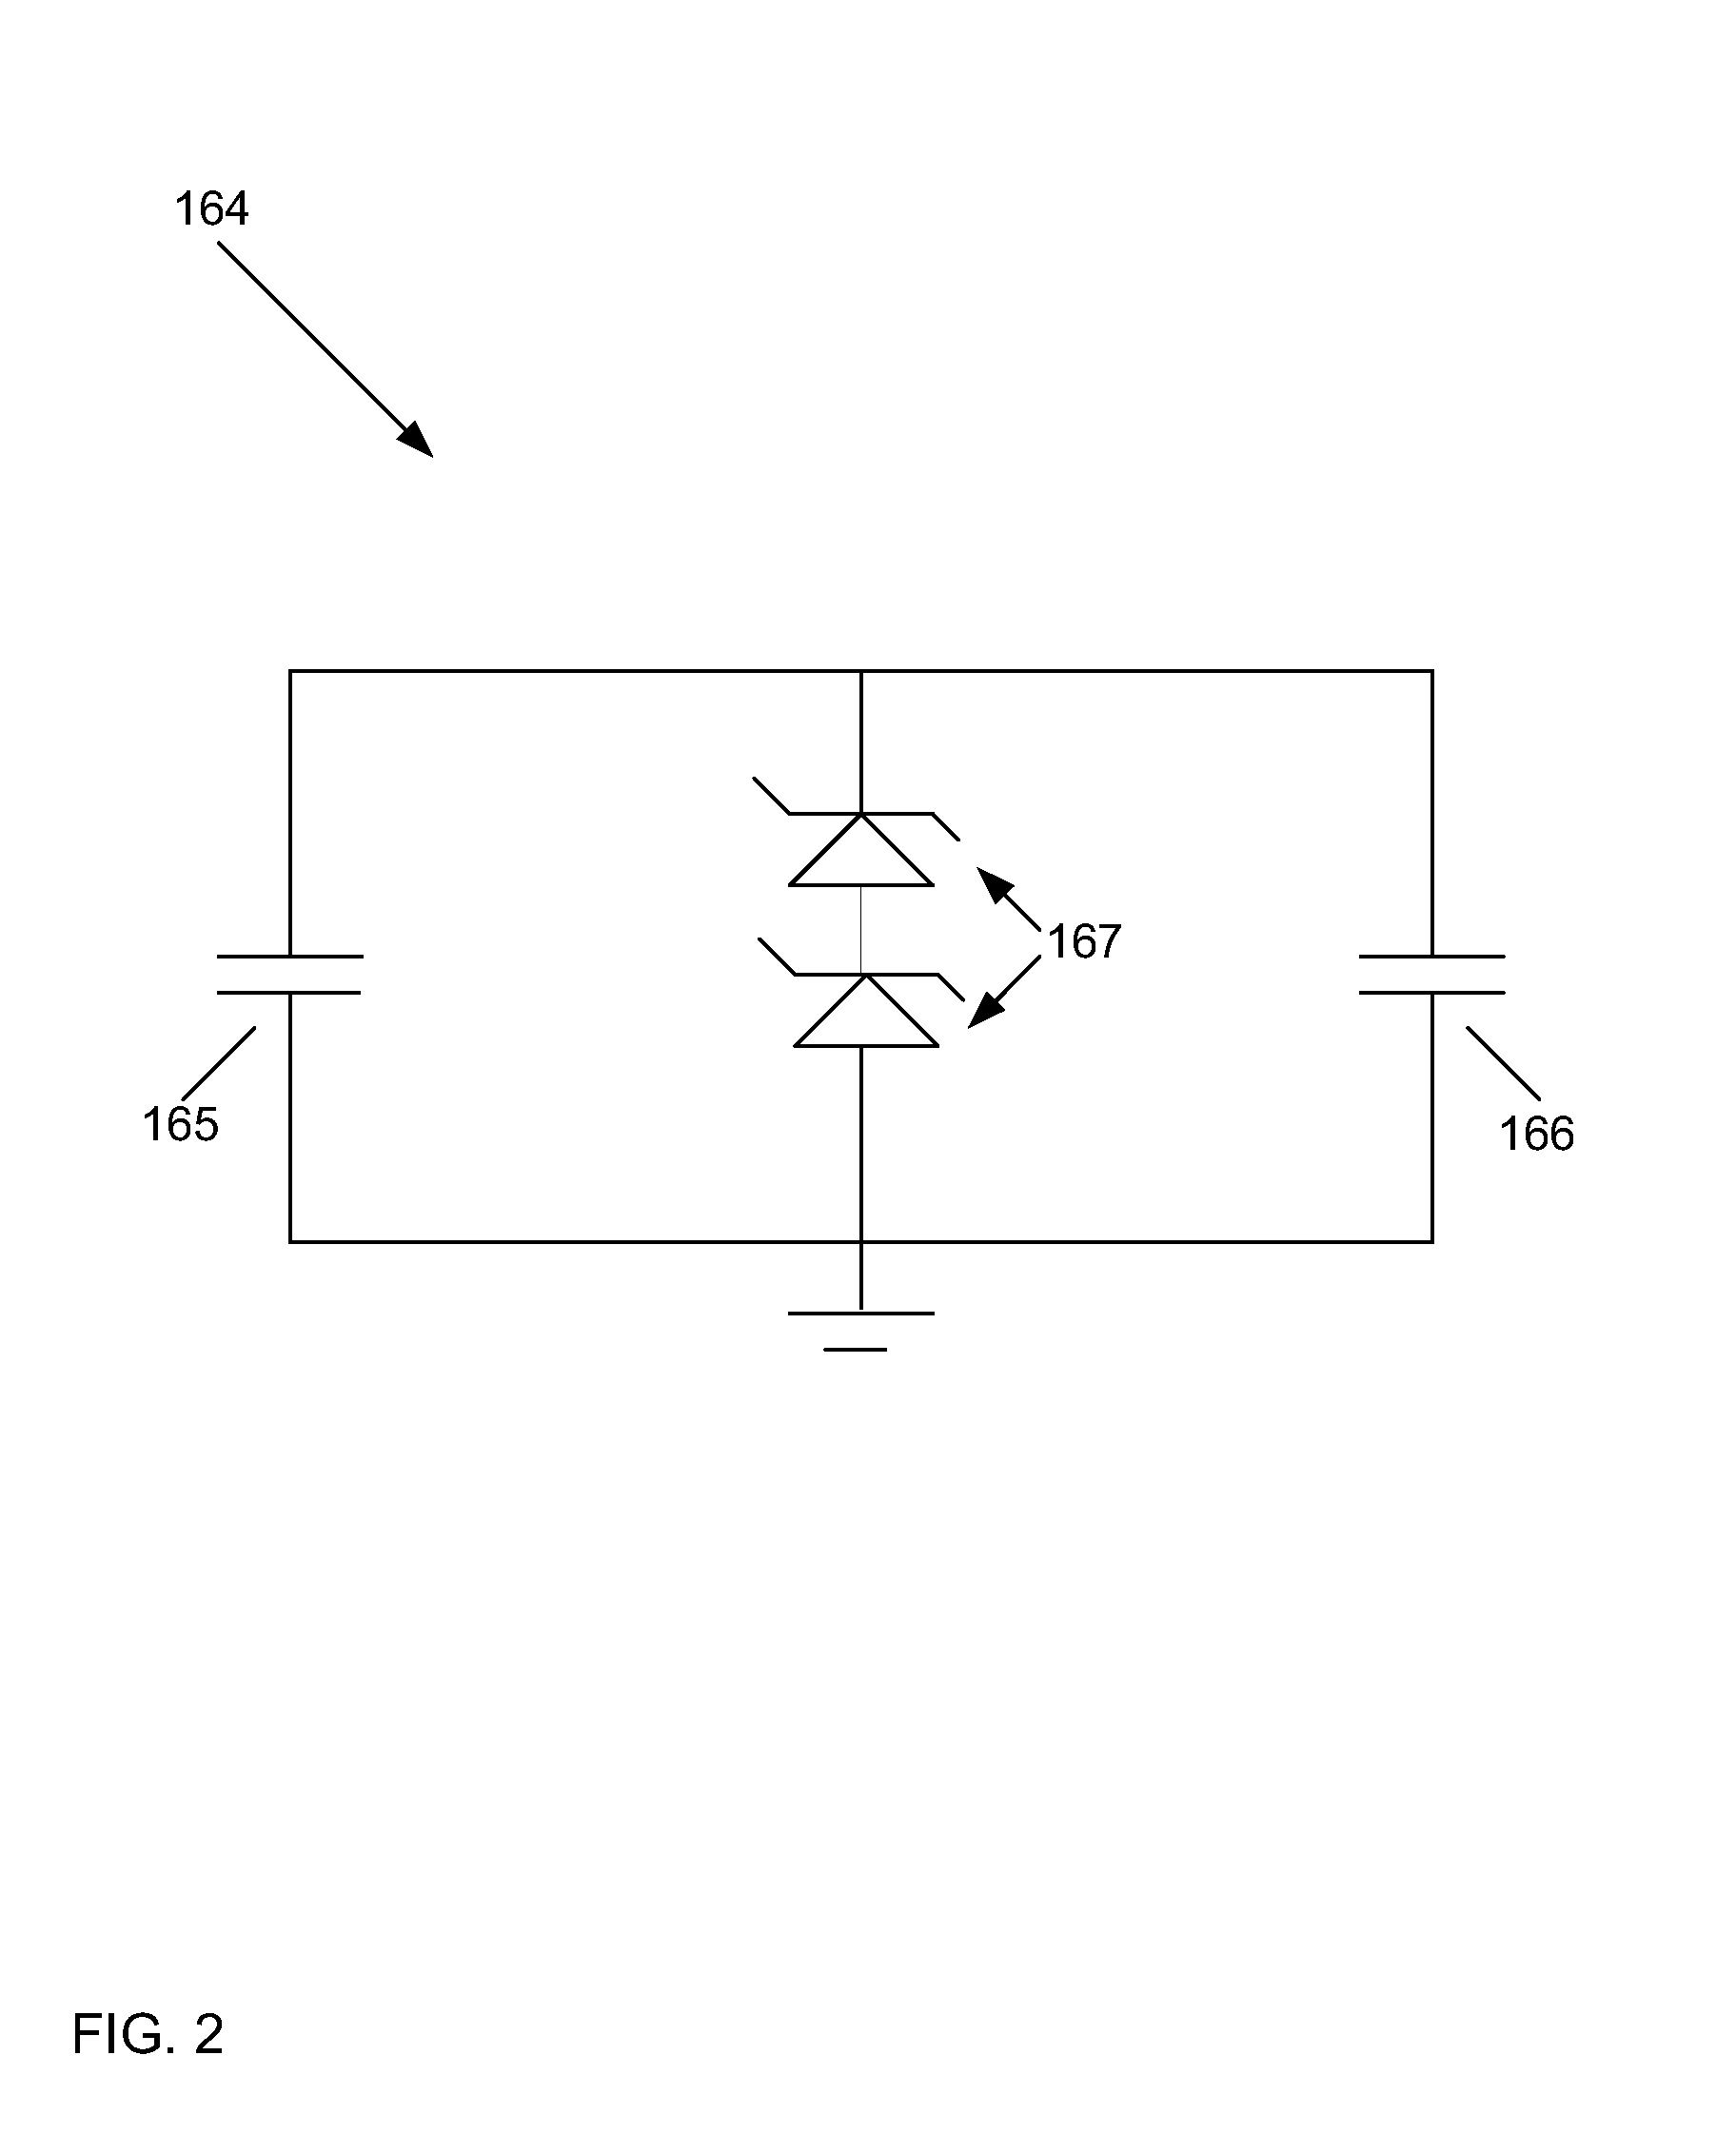 Partial discharge analysis coupling device